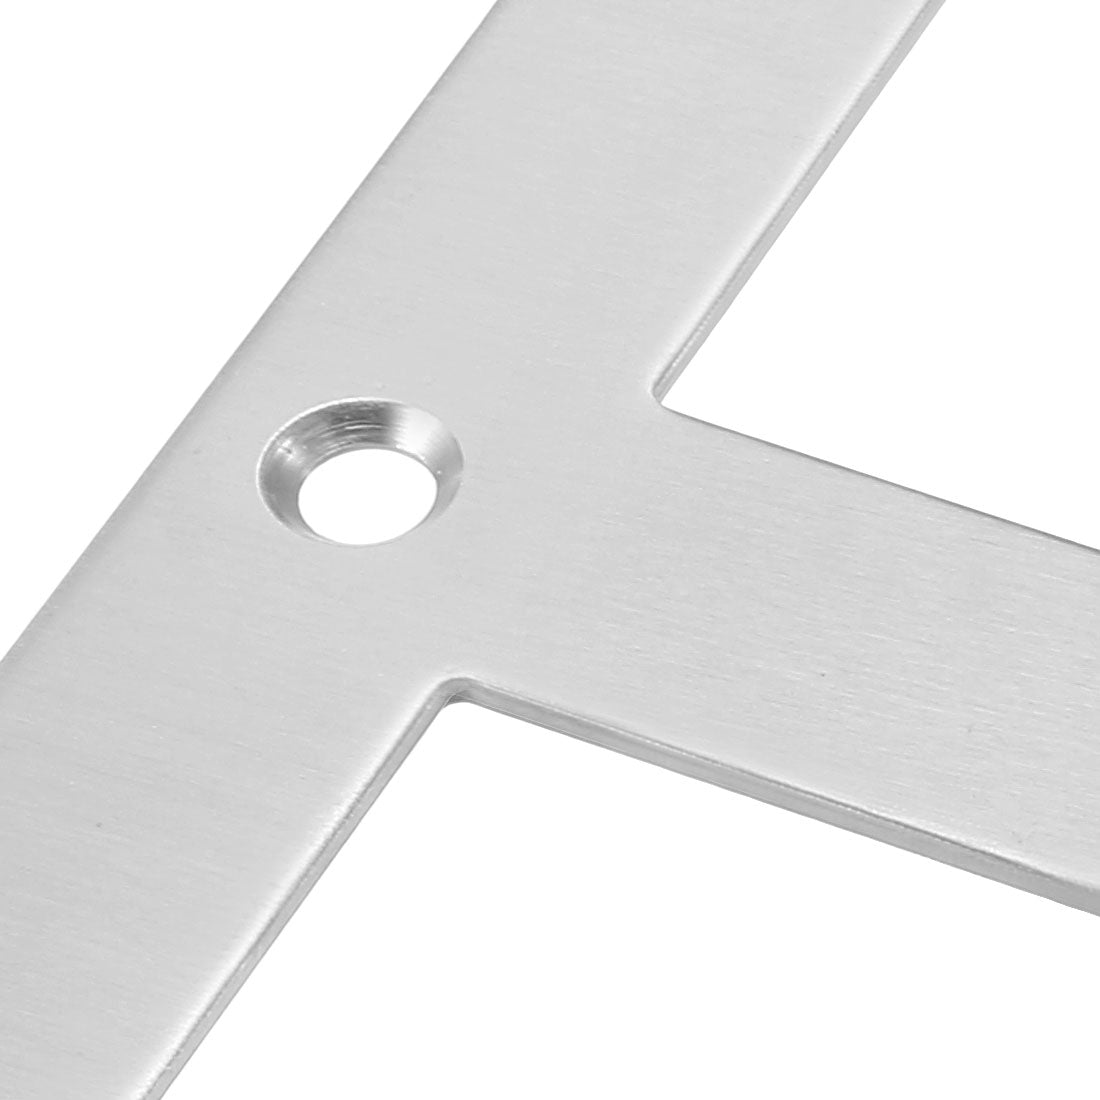 uxcell Uxcell Flat T Shape Repair Mending Plate, 120mmx120mm, Stainless steel Joining Bracket Support Brace, 1 Pcs